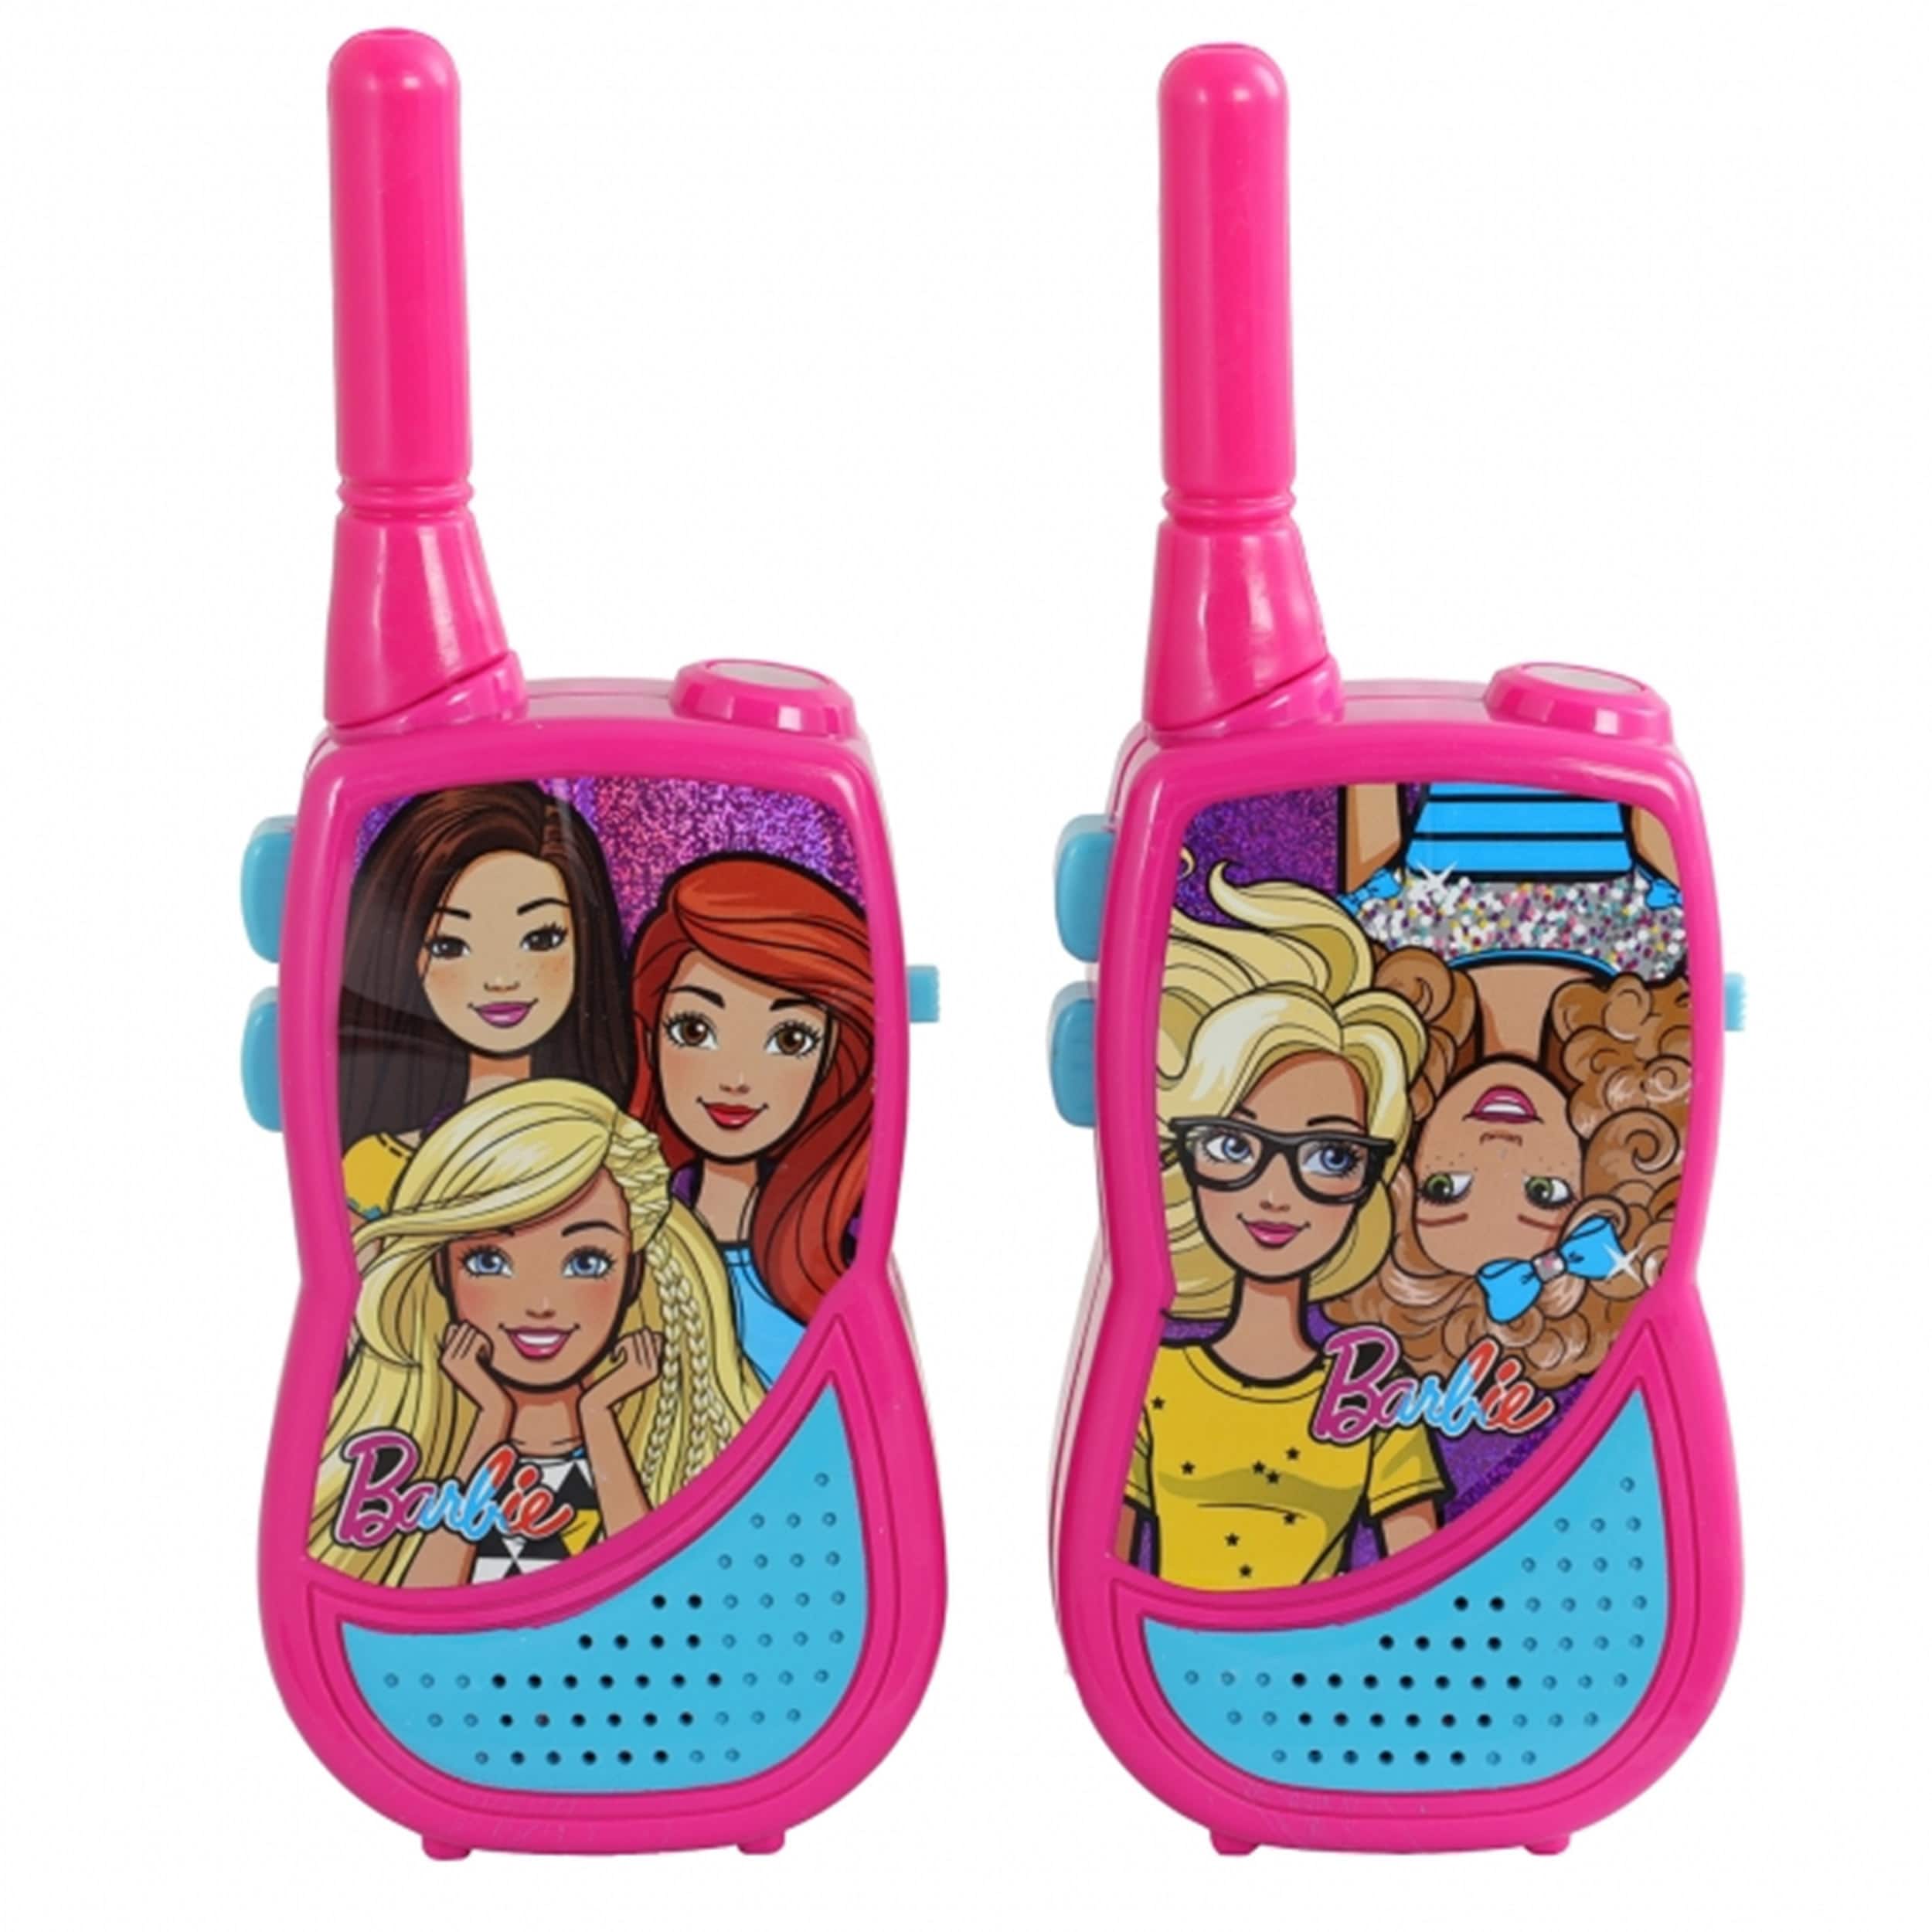 Barbie® Night Action Walkie Talkies with Built in Flashlight |